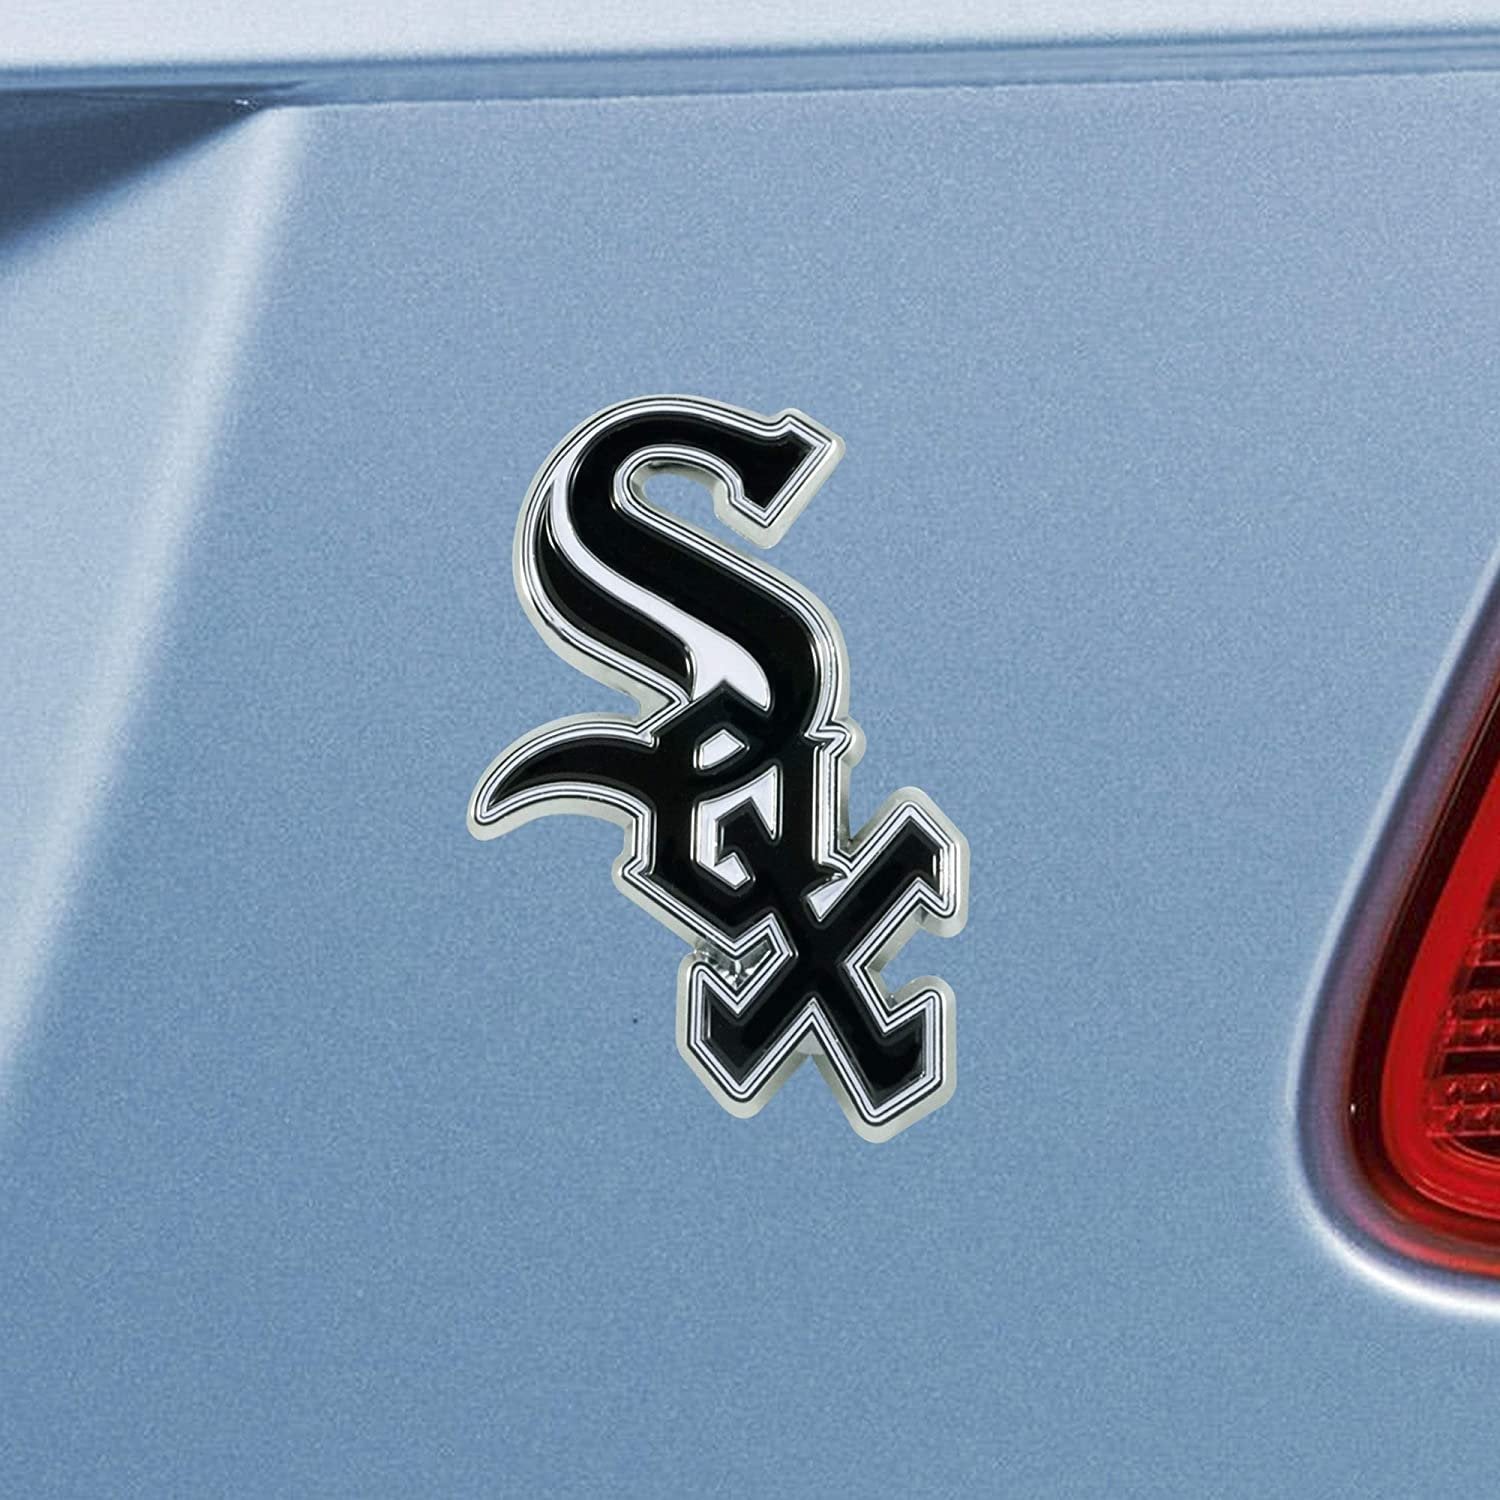 Chicago White Sox Solid Metal Color Auto Emblem Raised Decal Adhesive Tape Backing